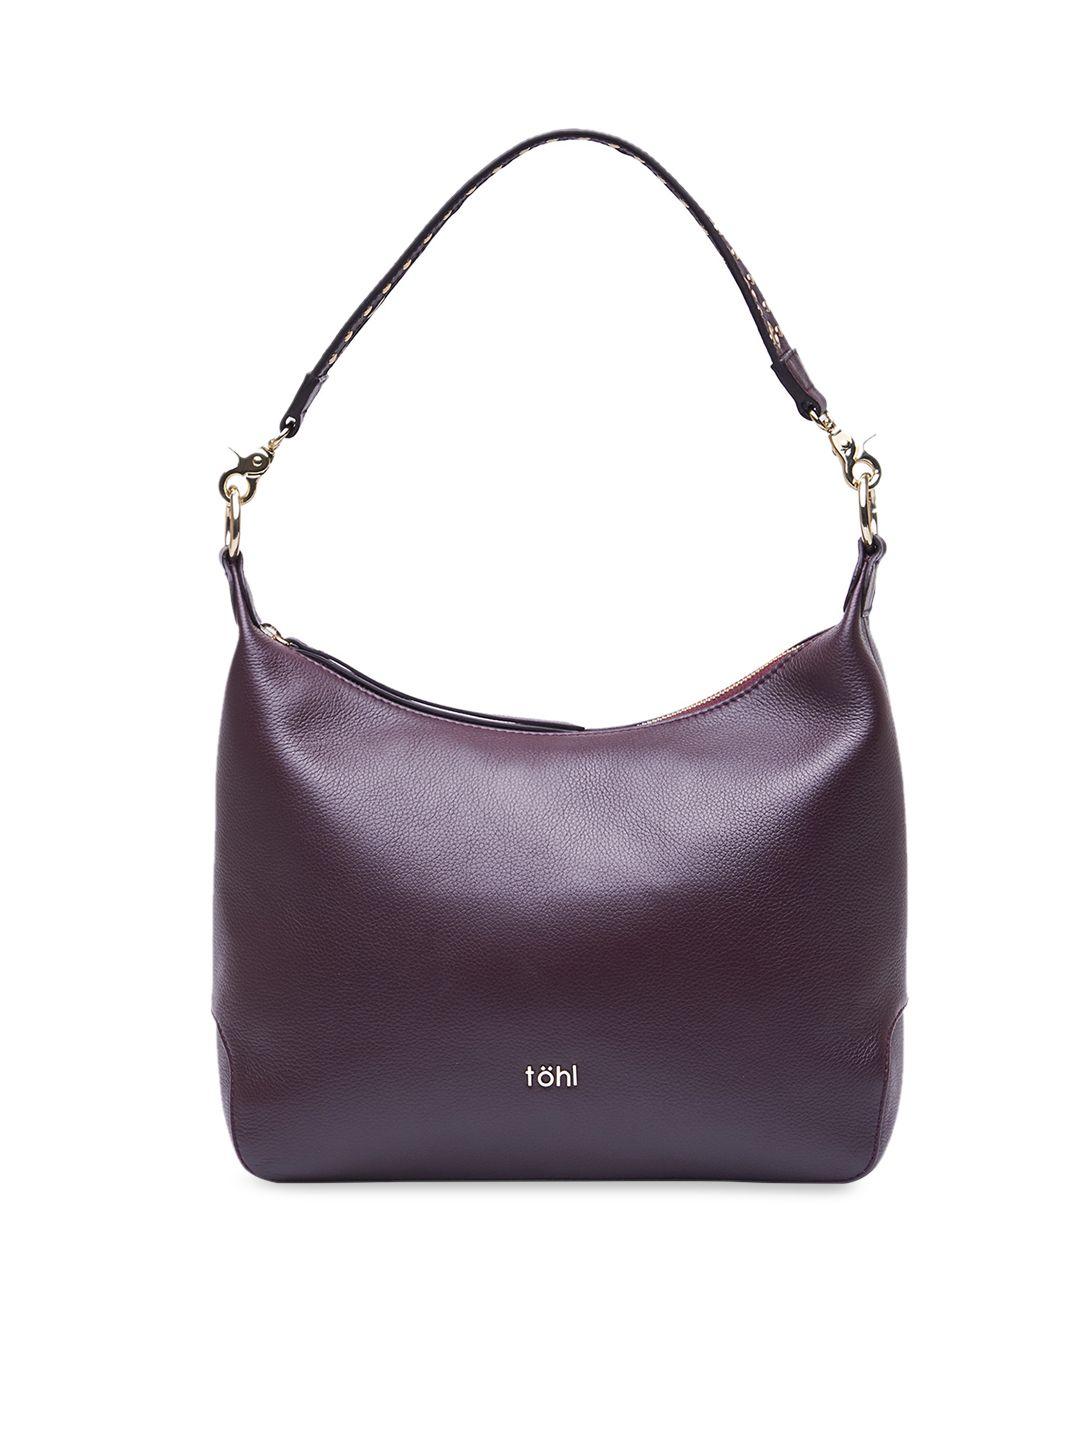 tohl purple solid leather hobo bag